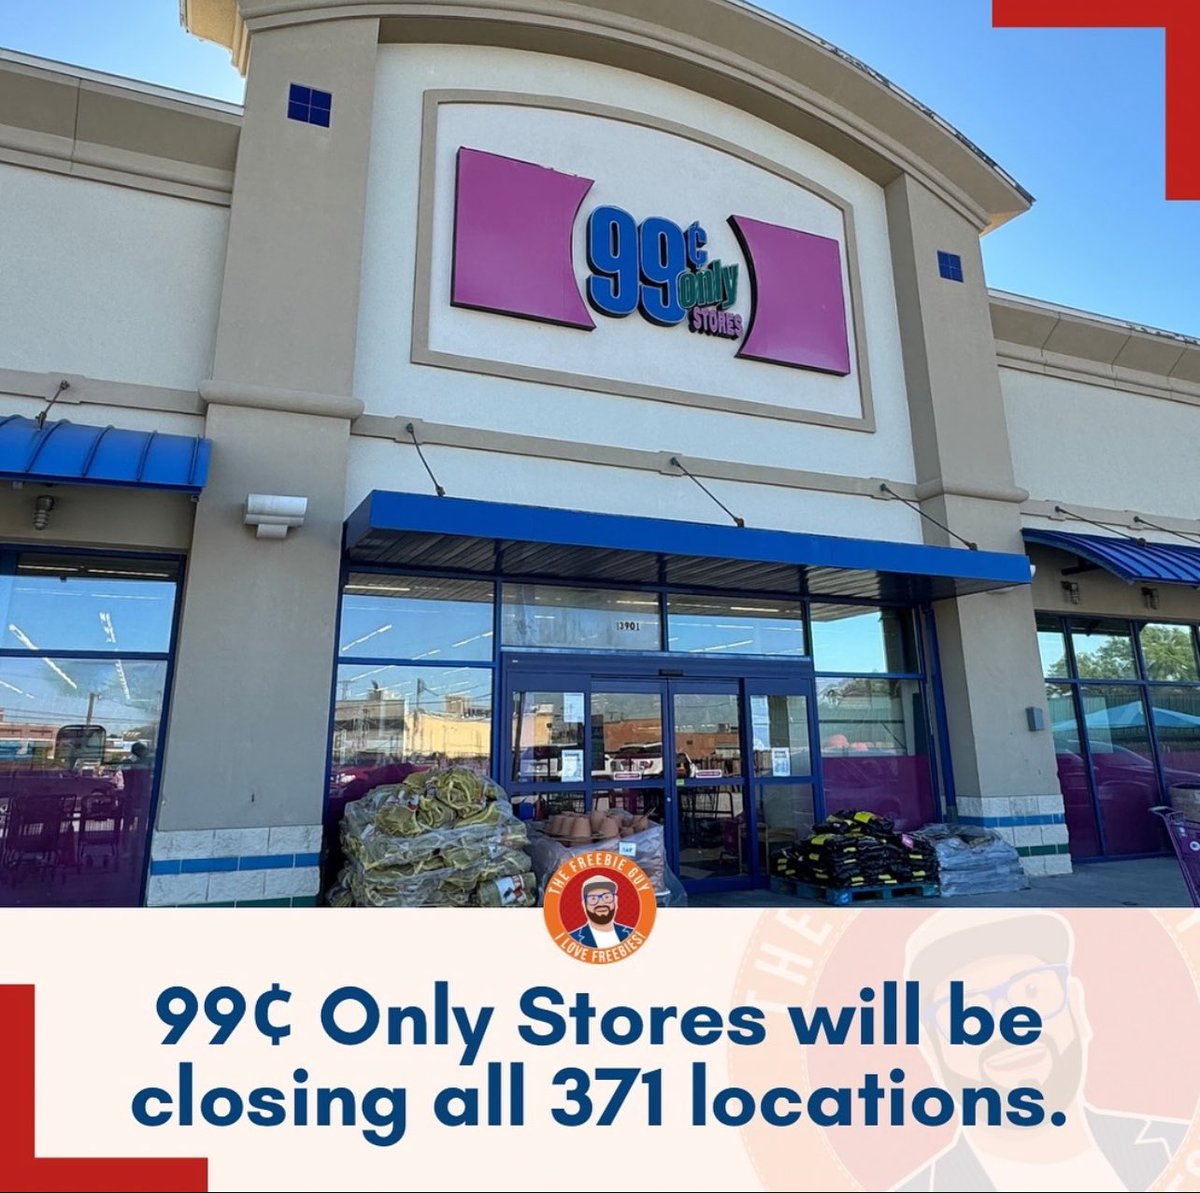 I grew up going to the 99 cent store with my mom, when my son was younger I’d take him and tell him to pick out whatever he wanted! I am sad to hear that it is closing all 371 locations. This is Biden’s America that not even the 99 cent store can survive.